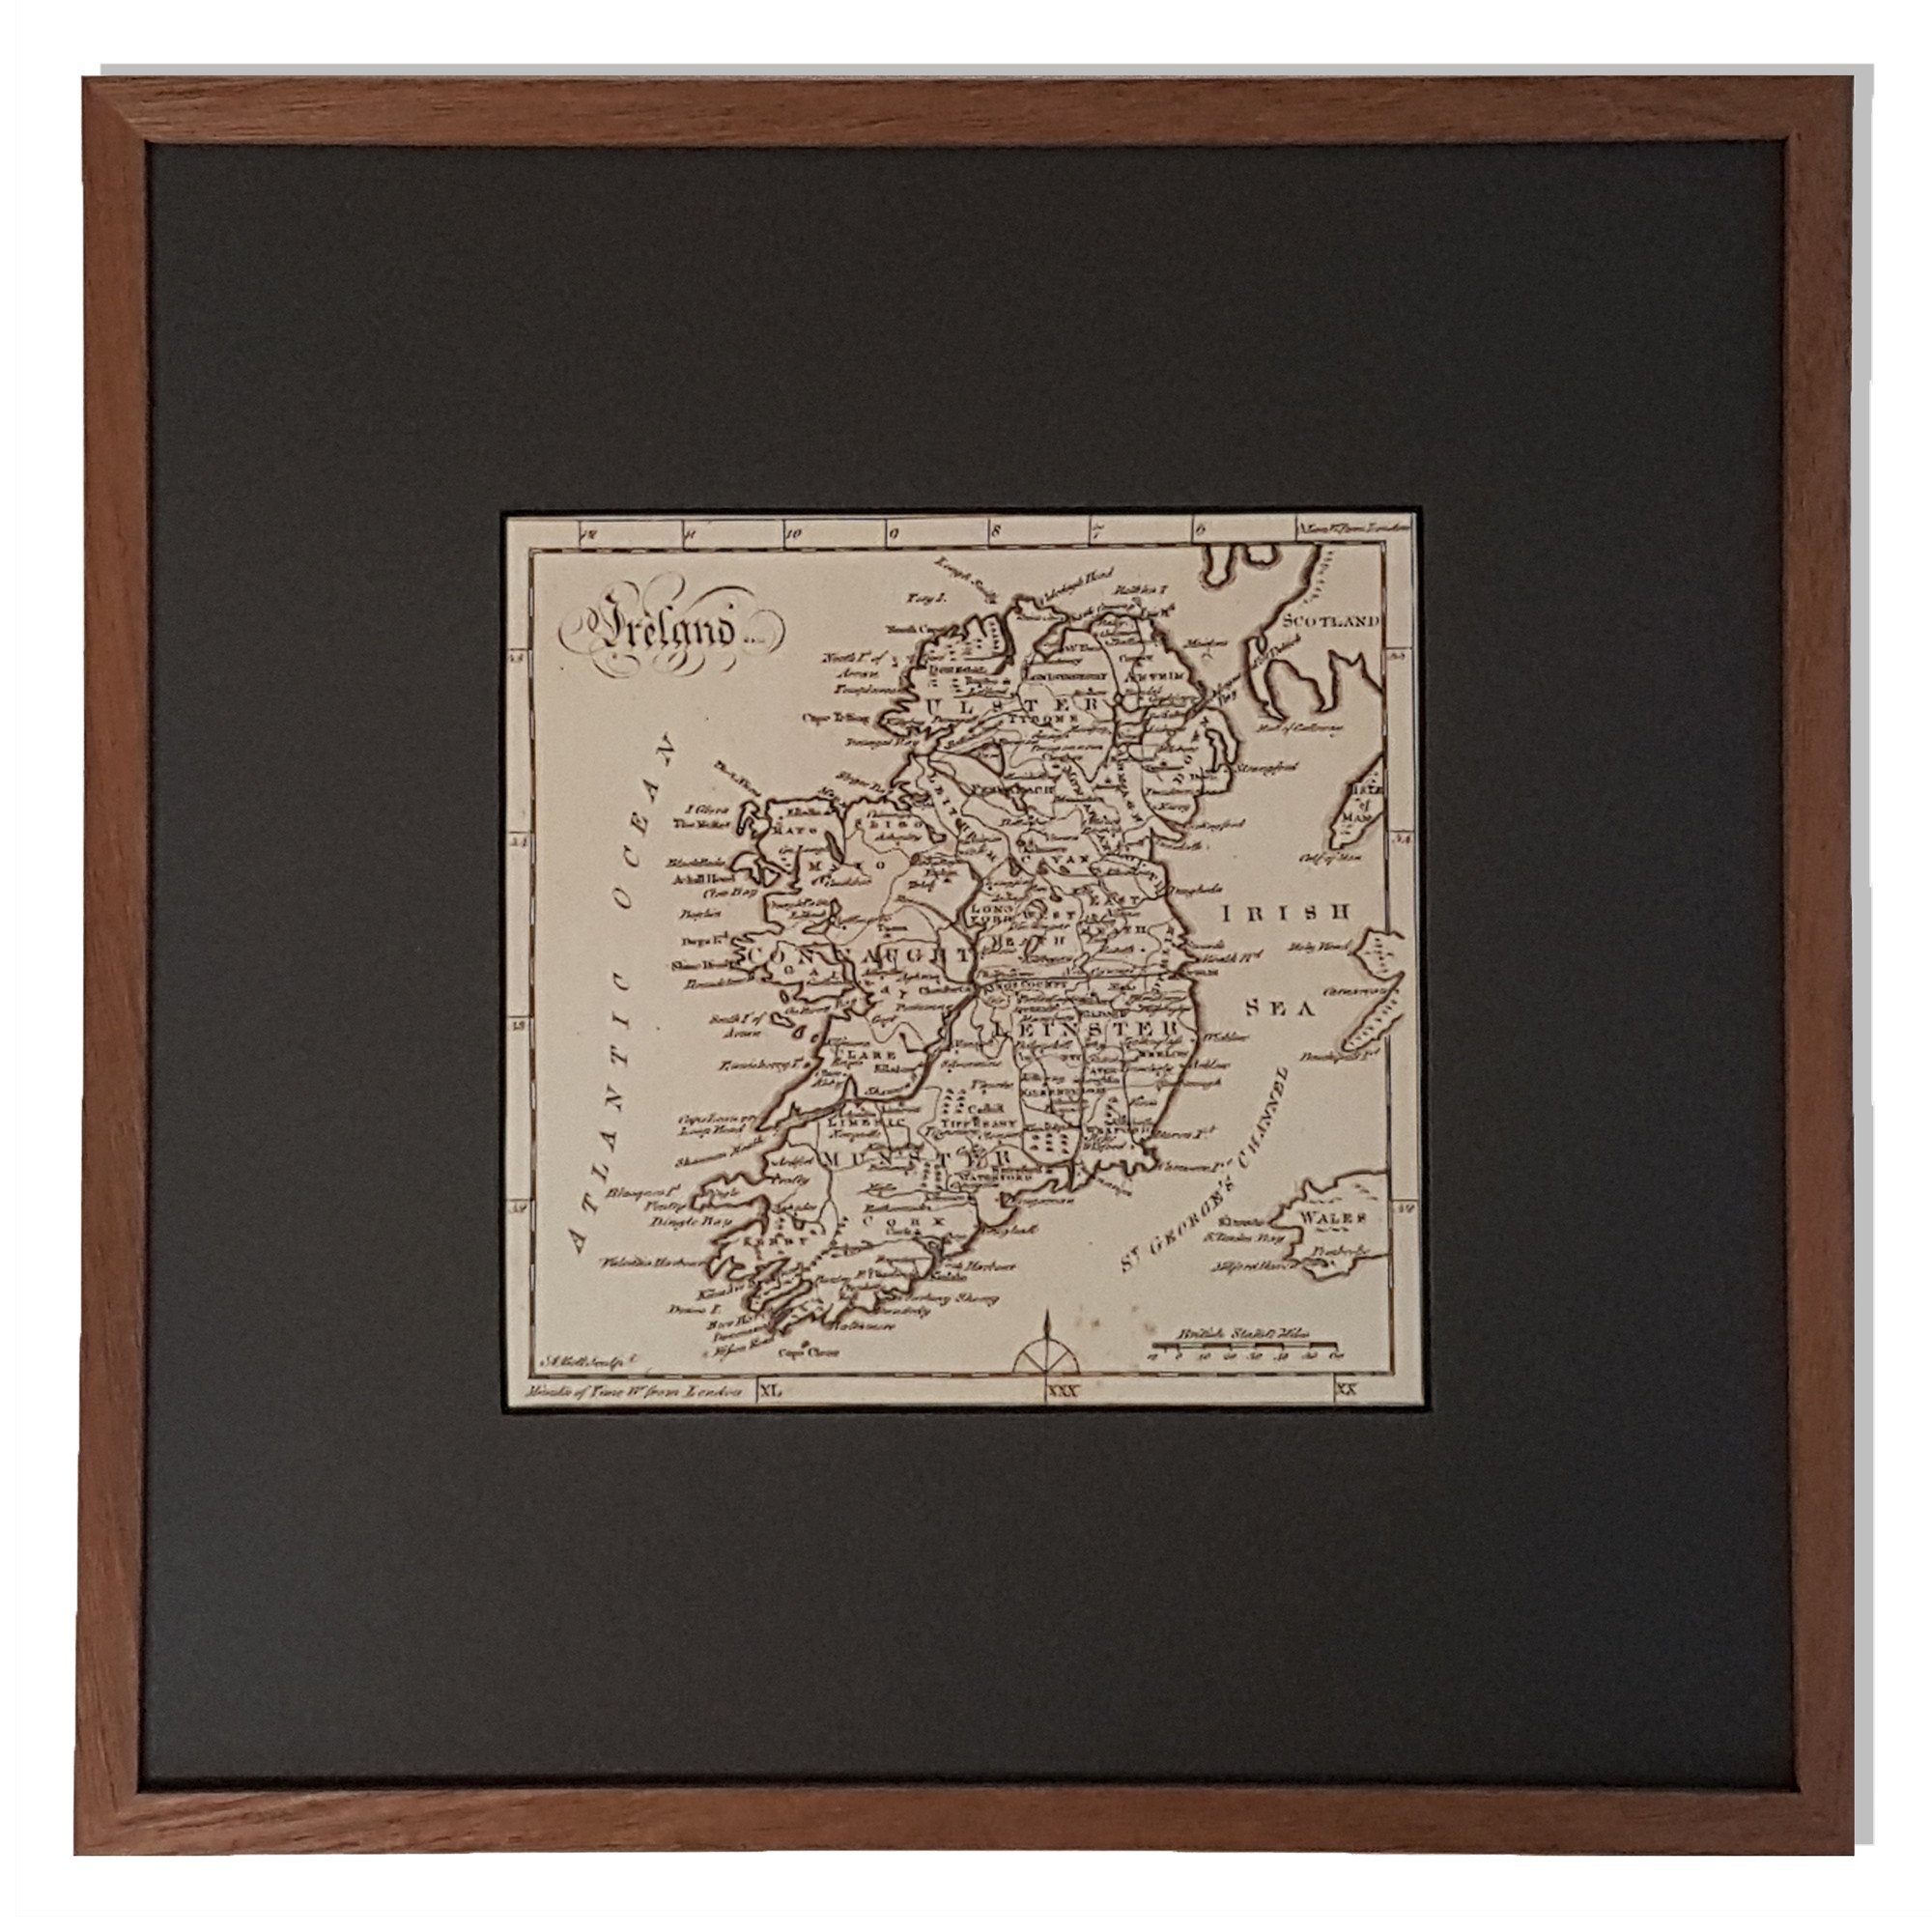 Product image for Framed Map of Ireland Art Print